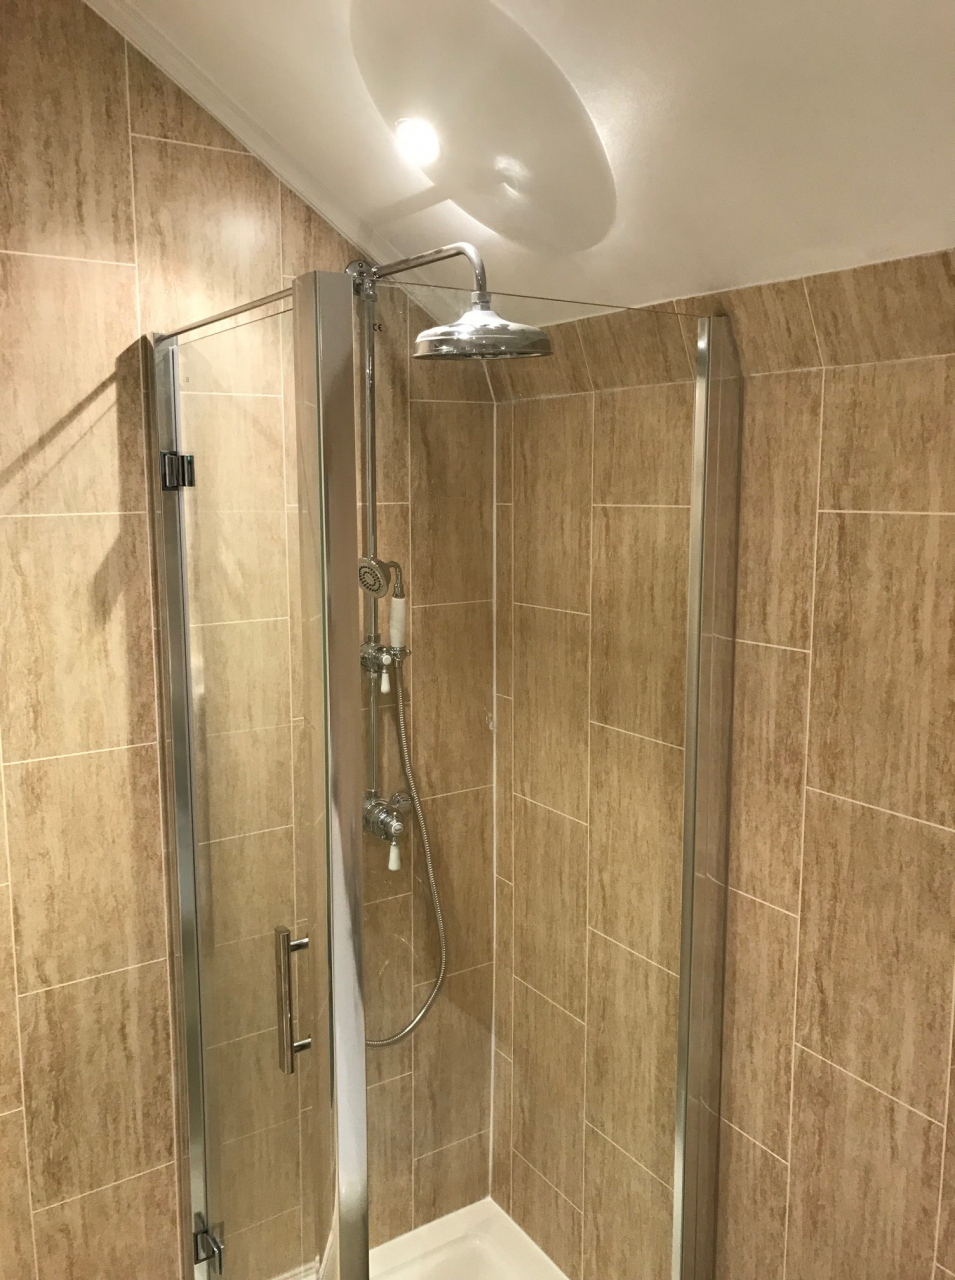 Corner shower enclosure fitted in bathroom designed for the whole family